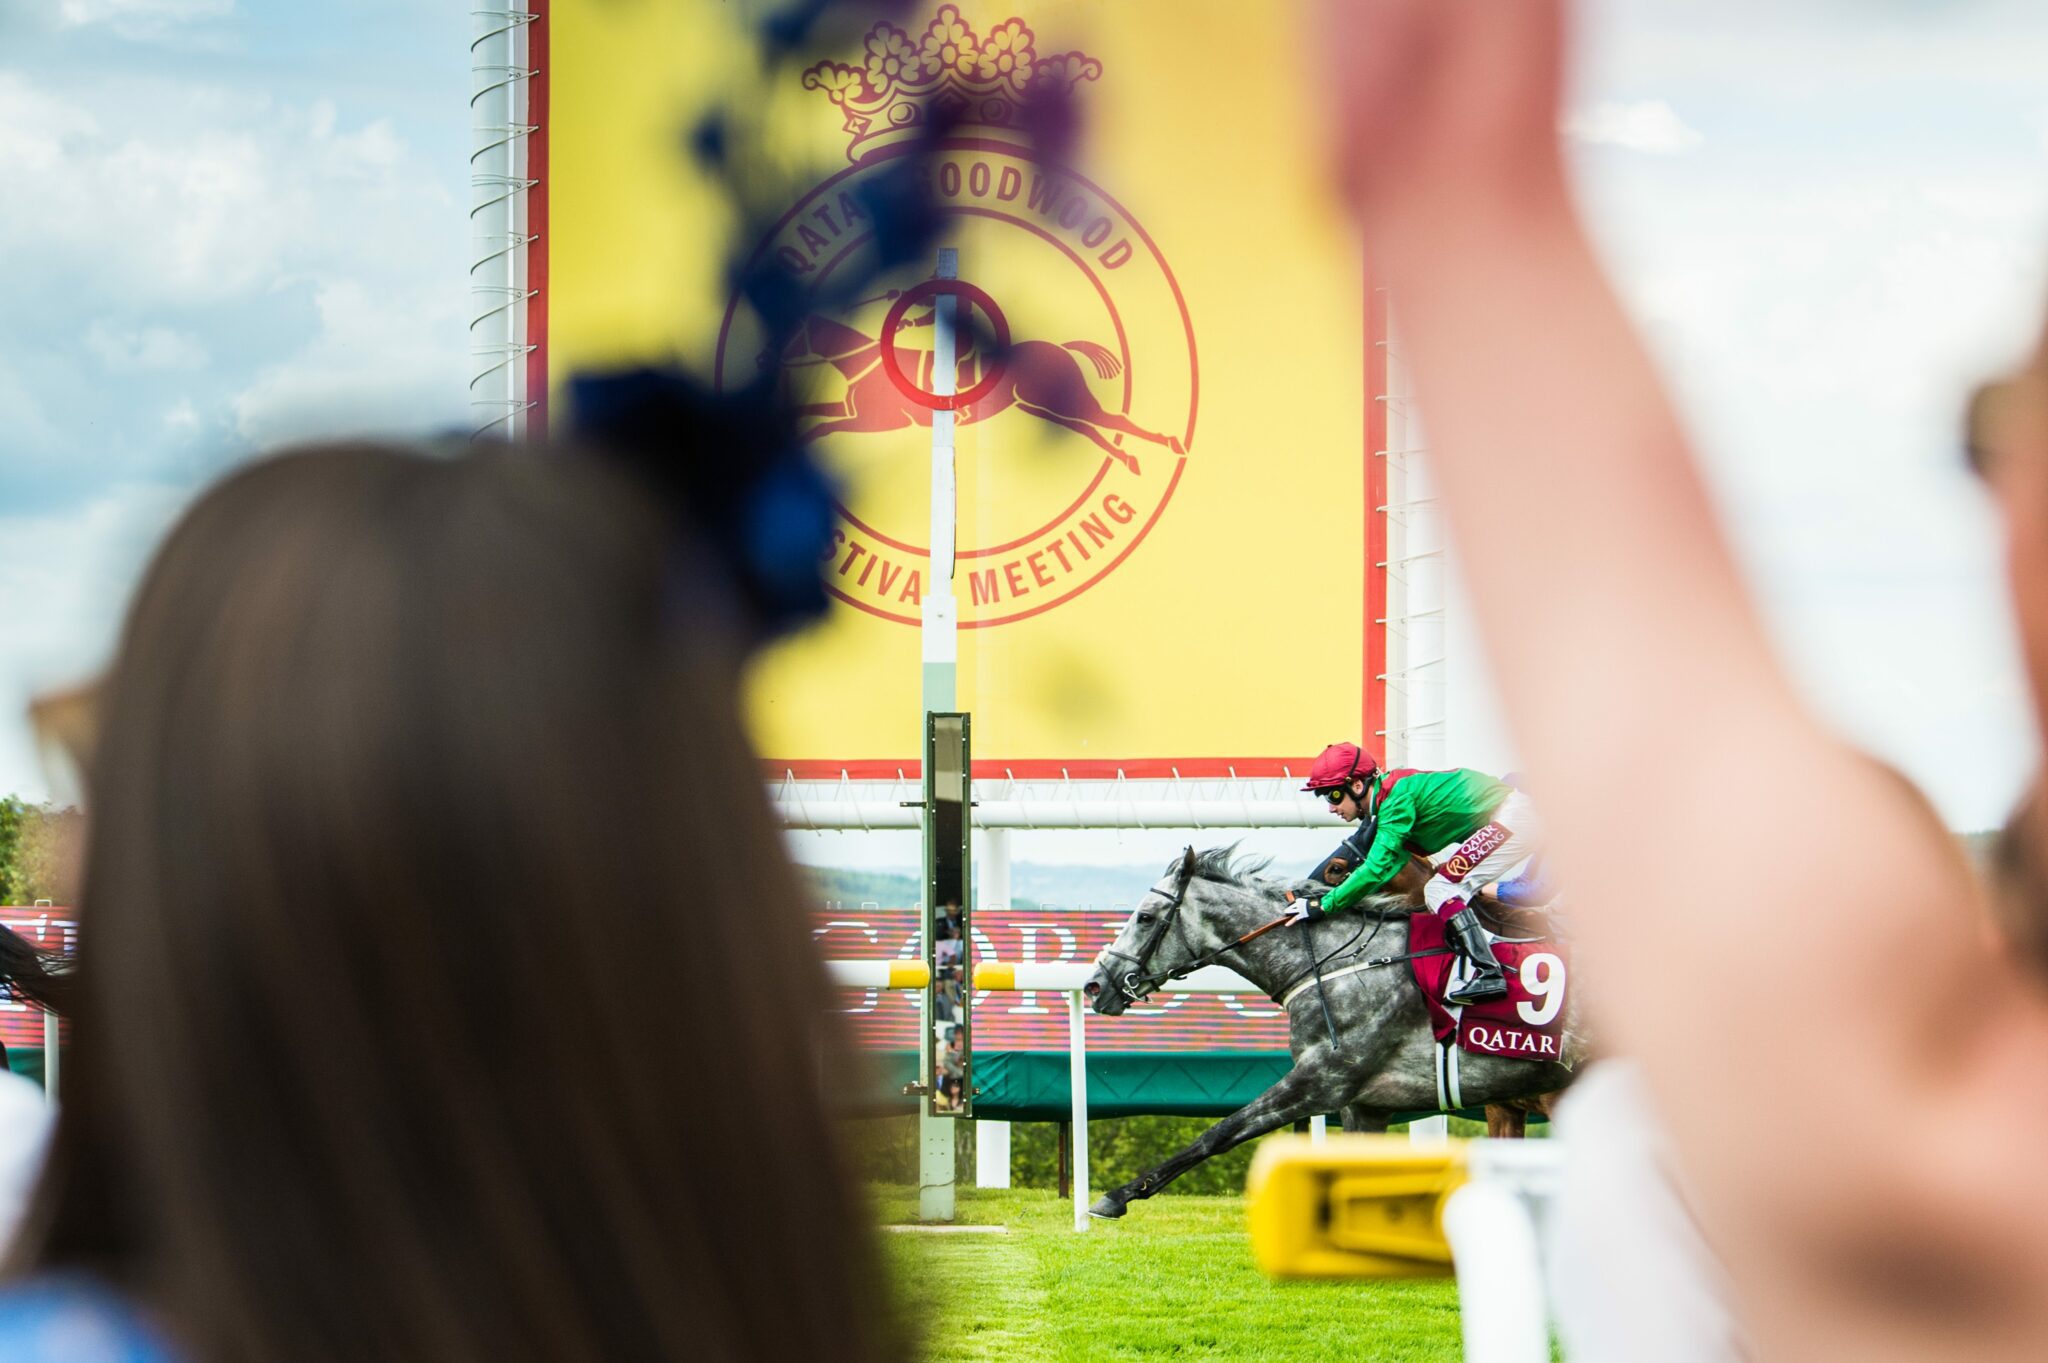 Close to the action at Qatar Goodwood festival